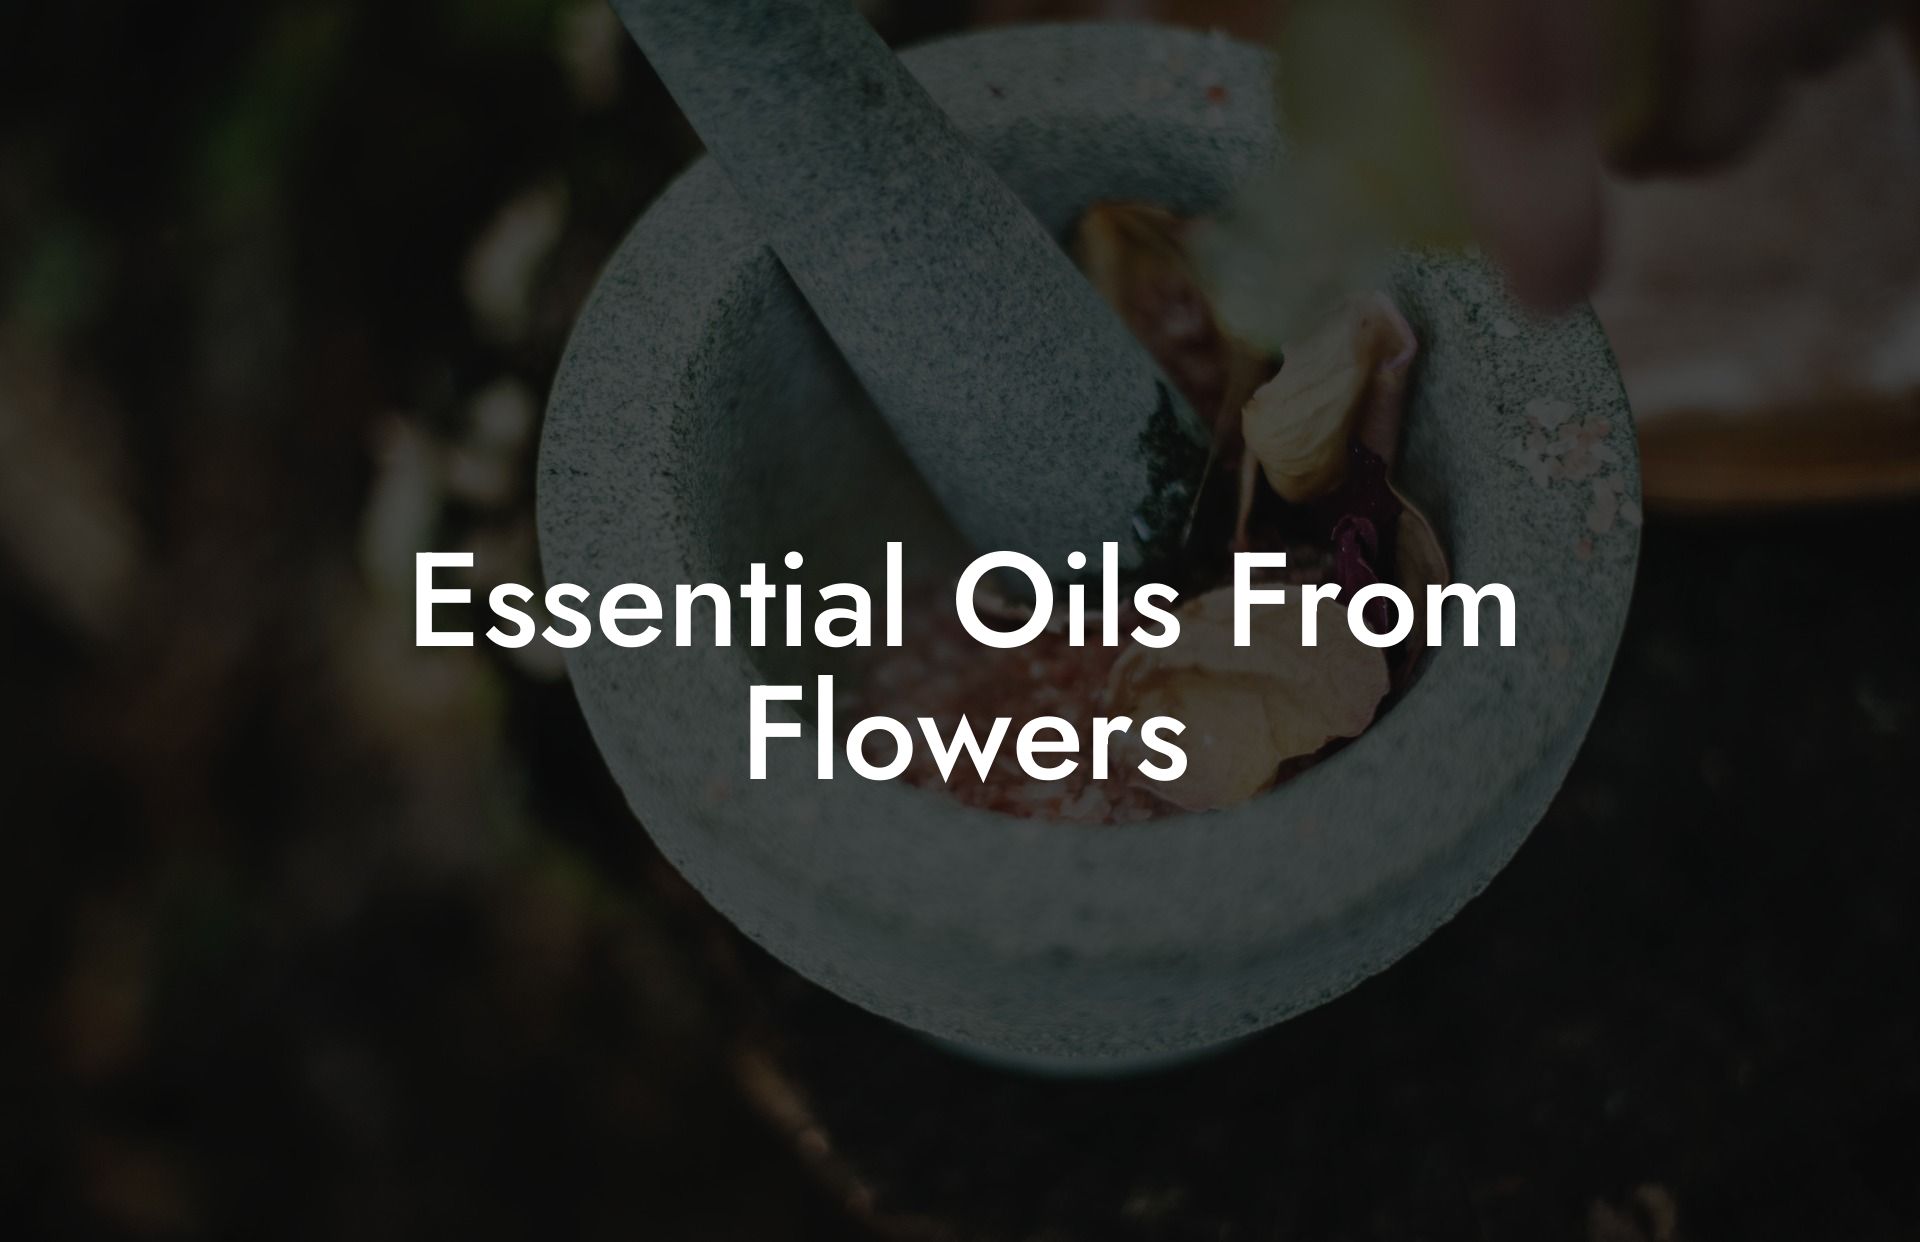 Essential Oils From Flowers